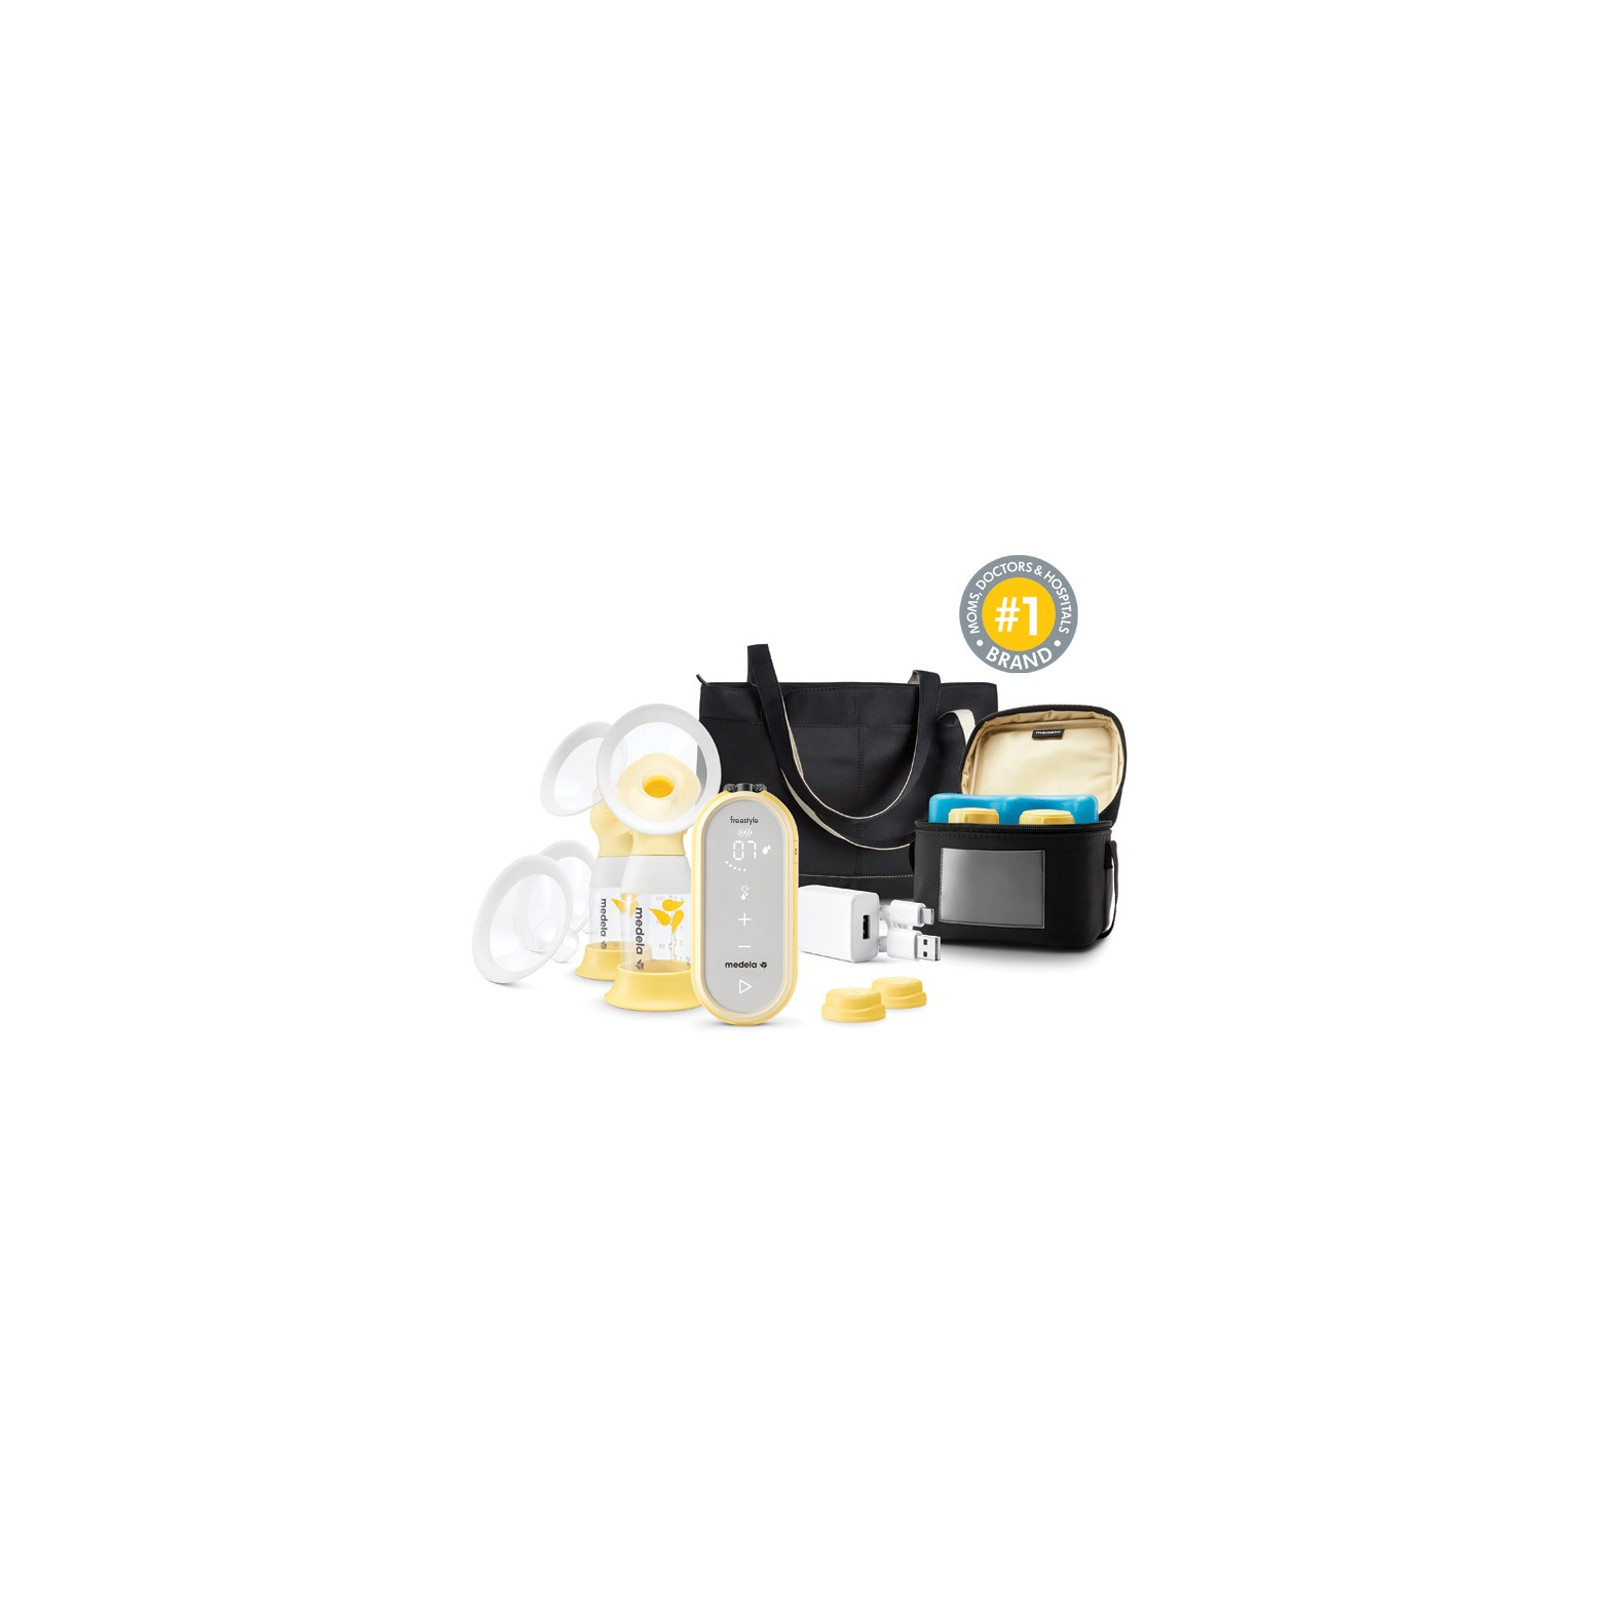 Medela Freestyle Flex Double Electric Breast pump (UPGRADE ONLY) 